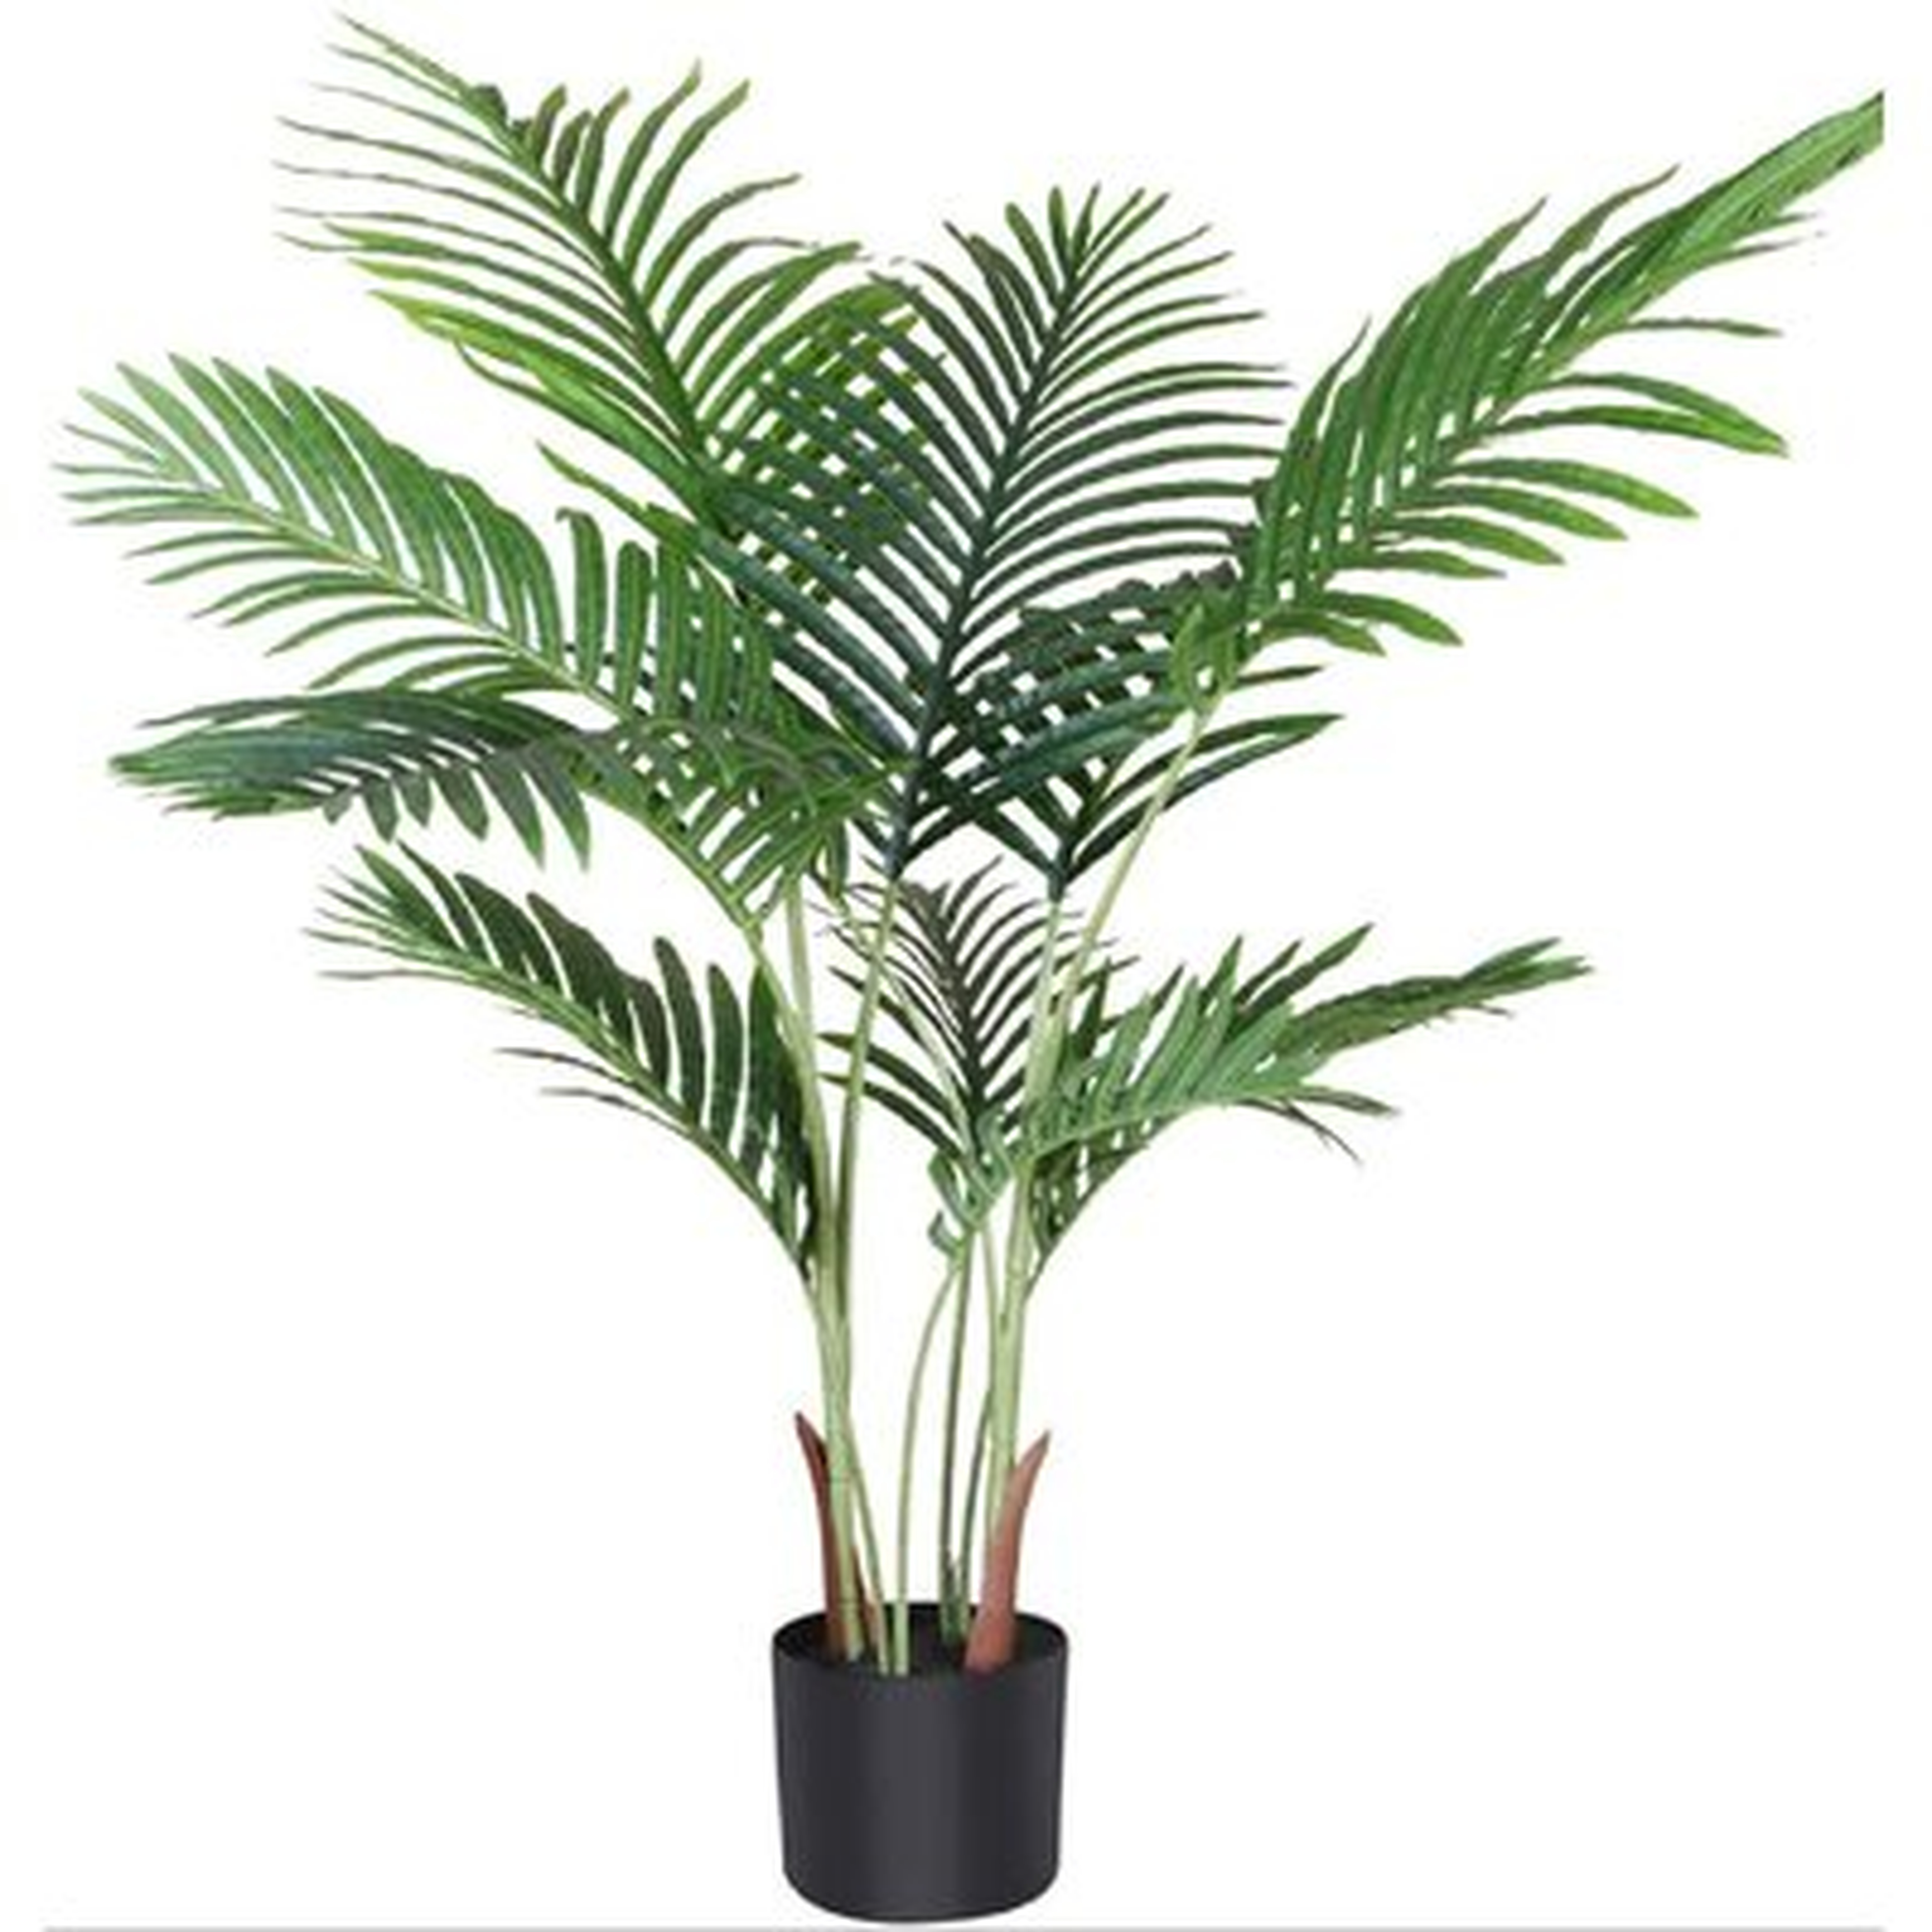 Artificial Areca Palm Plant 3.6 Feet Fake Palm Tree With 10 Trunks Faux Tree For Indoor Outdoor Modern Decor Feaux Dypsis Lutescens Plants In Pot For Home Office Perfect Housewarming Gift - Wayfair